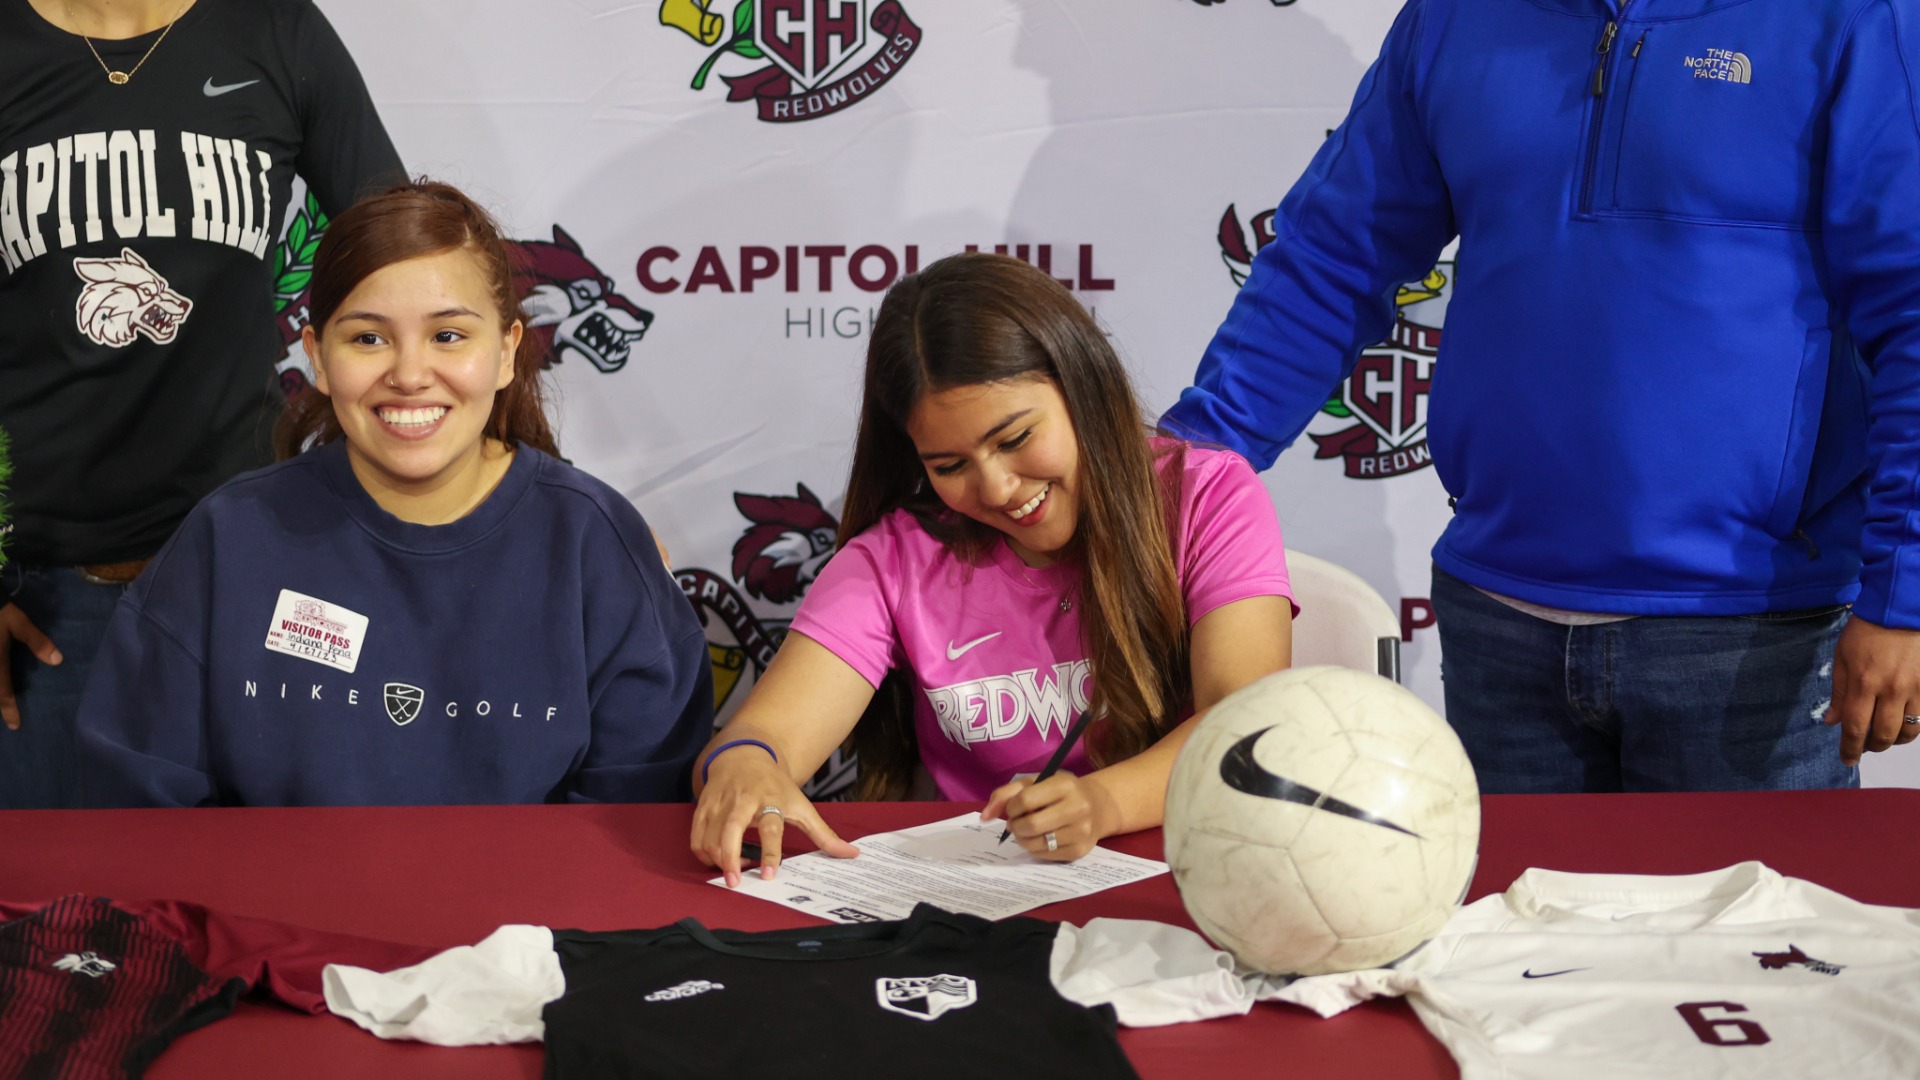 Slide 2 - Capitol Hill Soccer's Fernanda Pena Signs with Bethany College